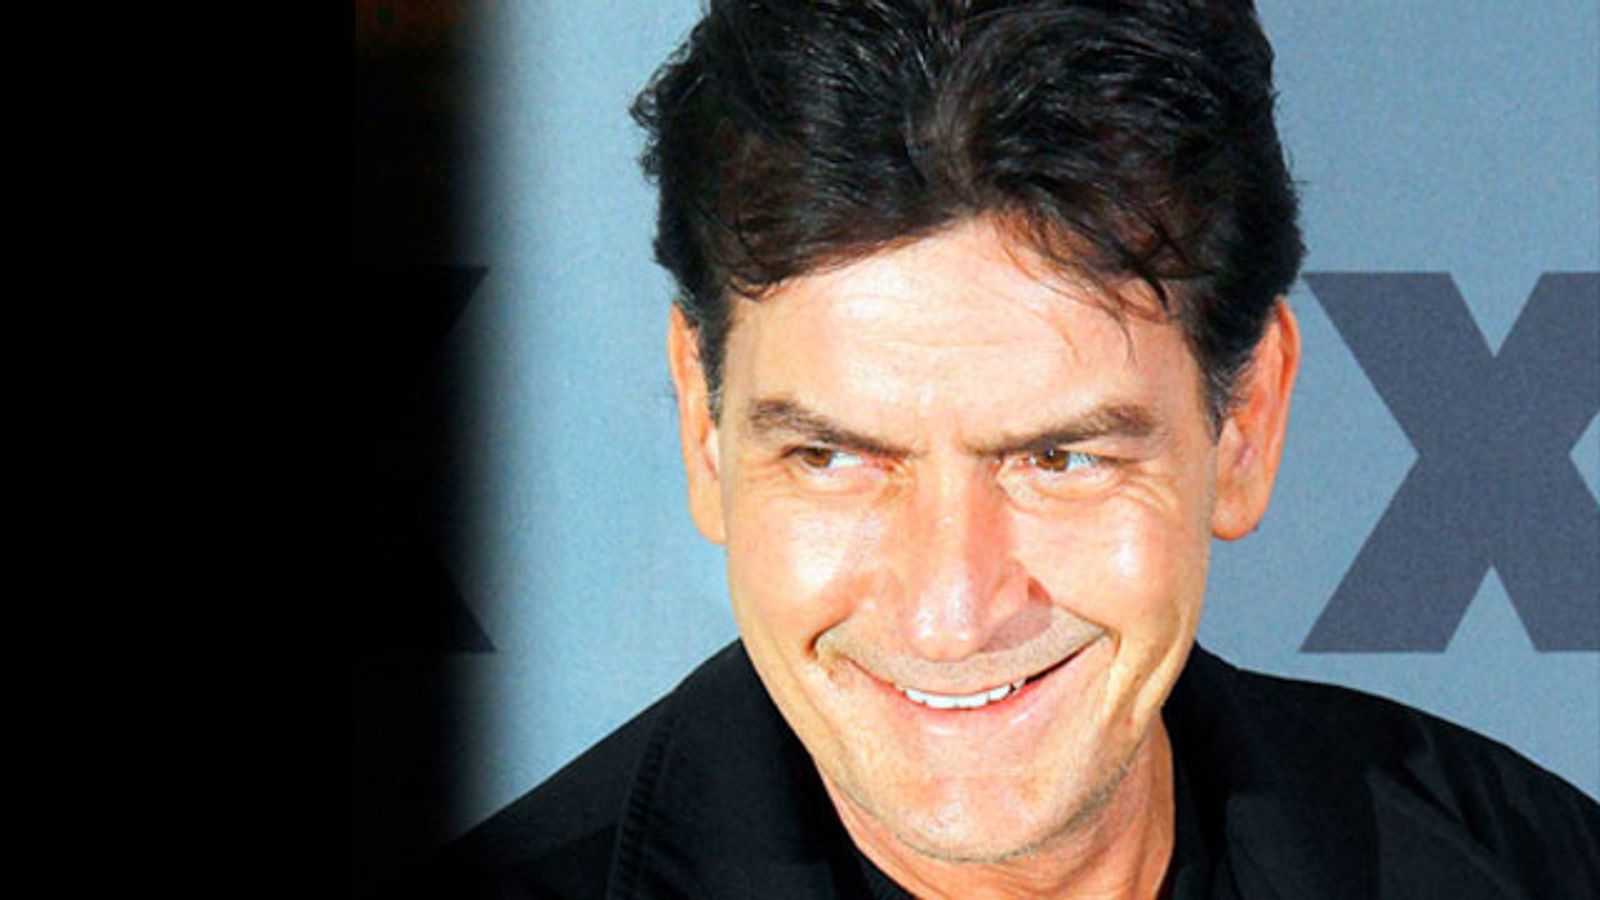 Sources Speculate Charlie Sheen Will Reveal HIV Status on 'Today' Show